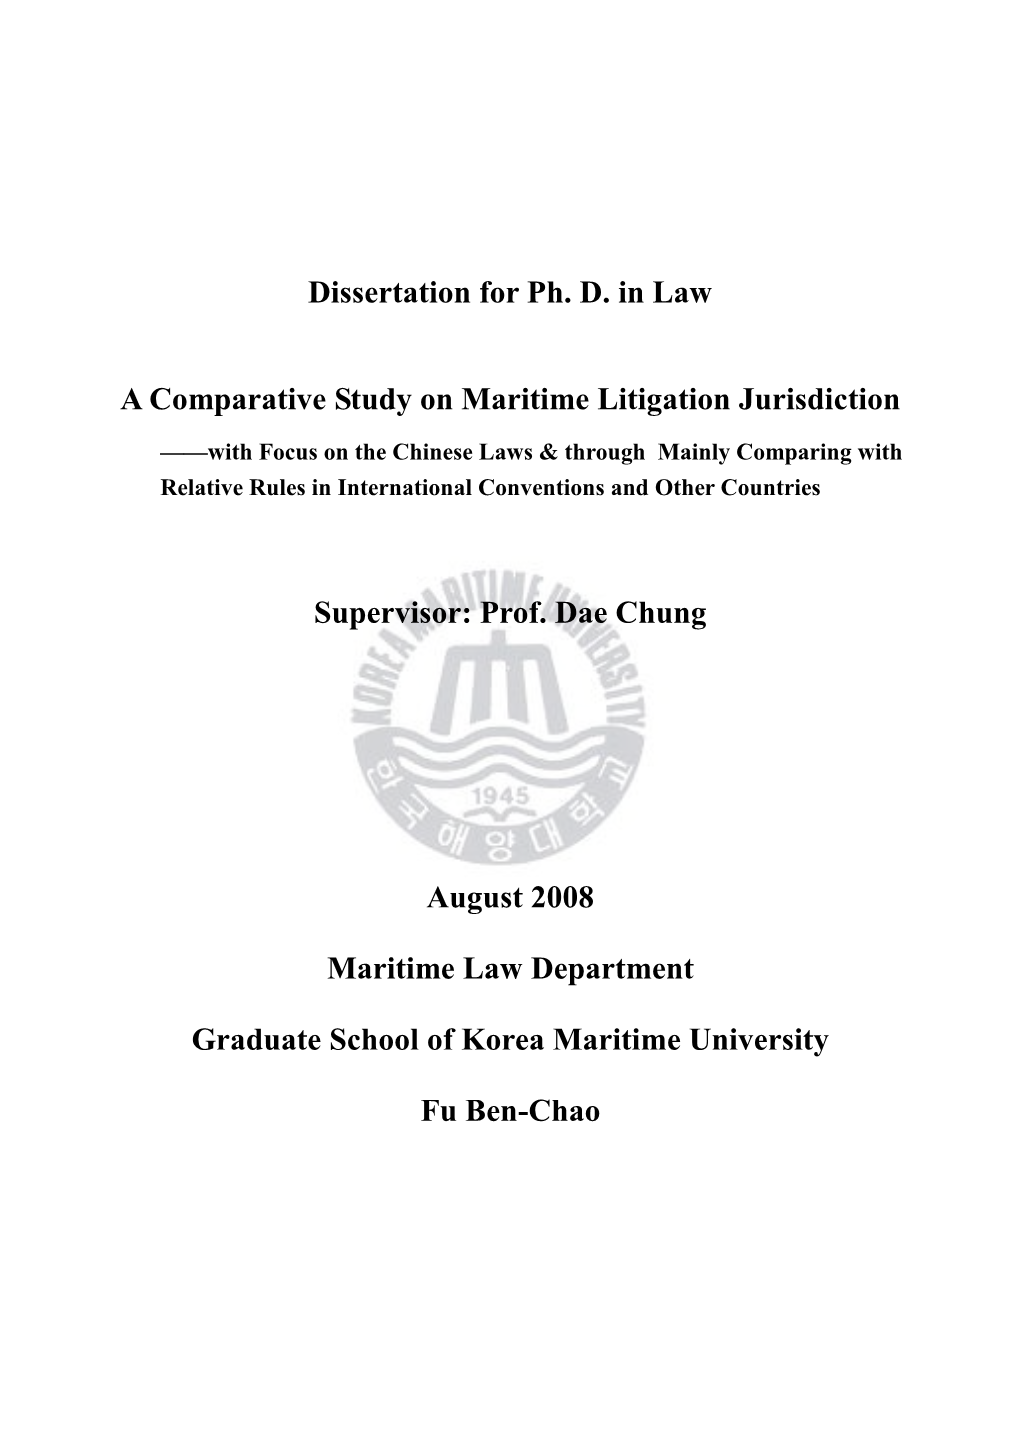 Dissertation for Ph. D. in Law a Comparative